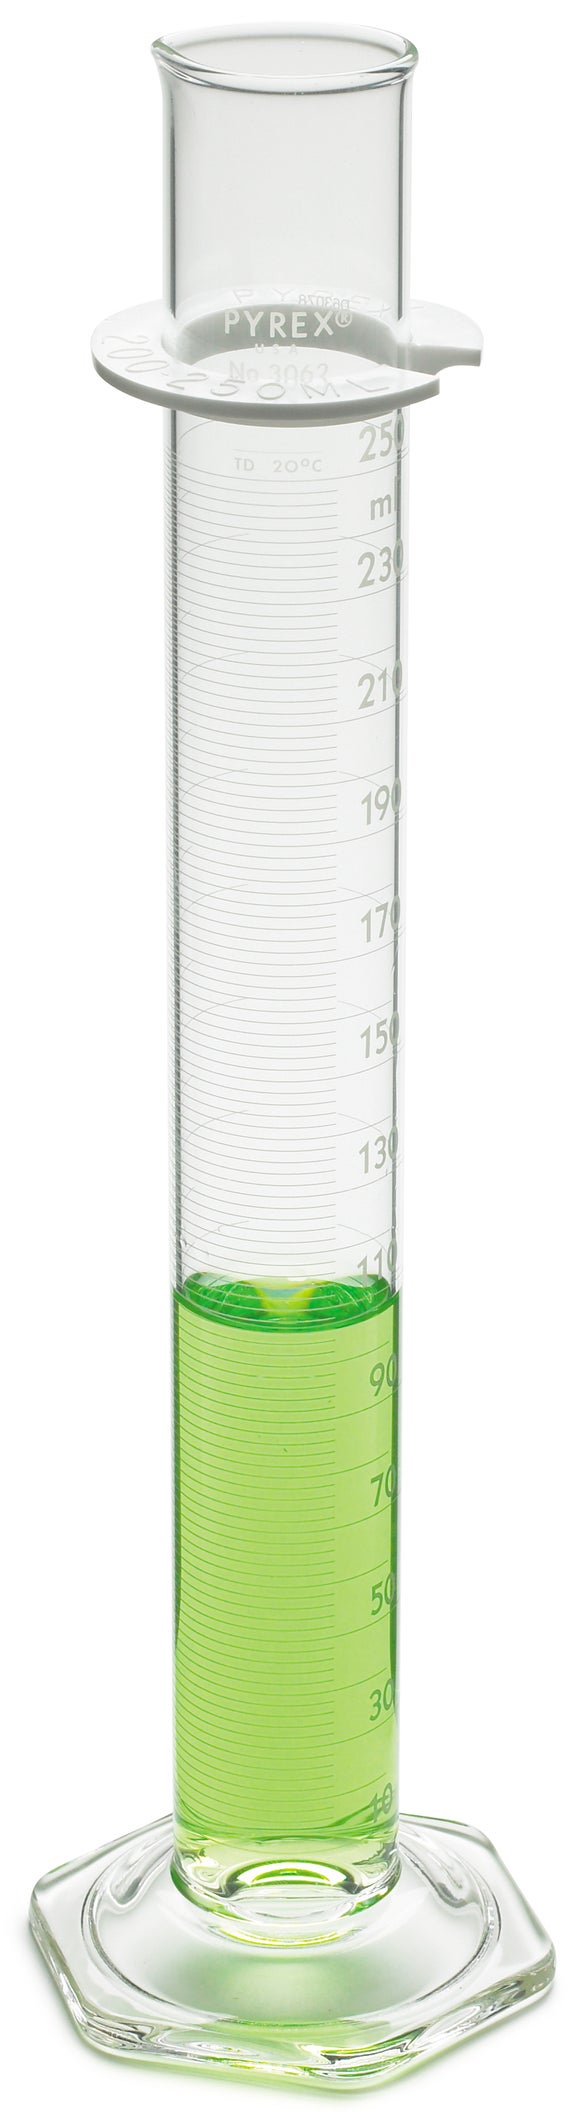 Cylinder, Graduated, 1000 mL, Certified